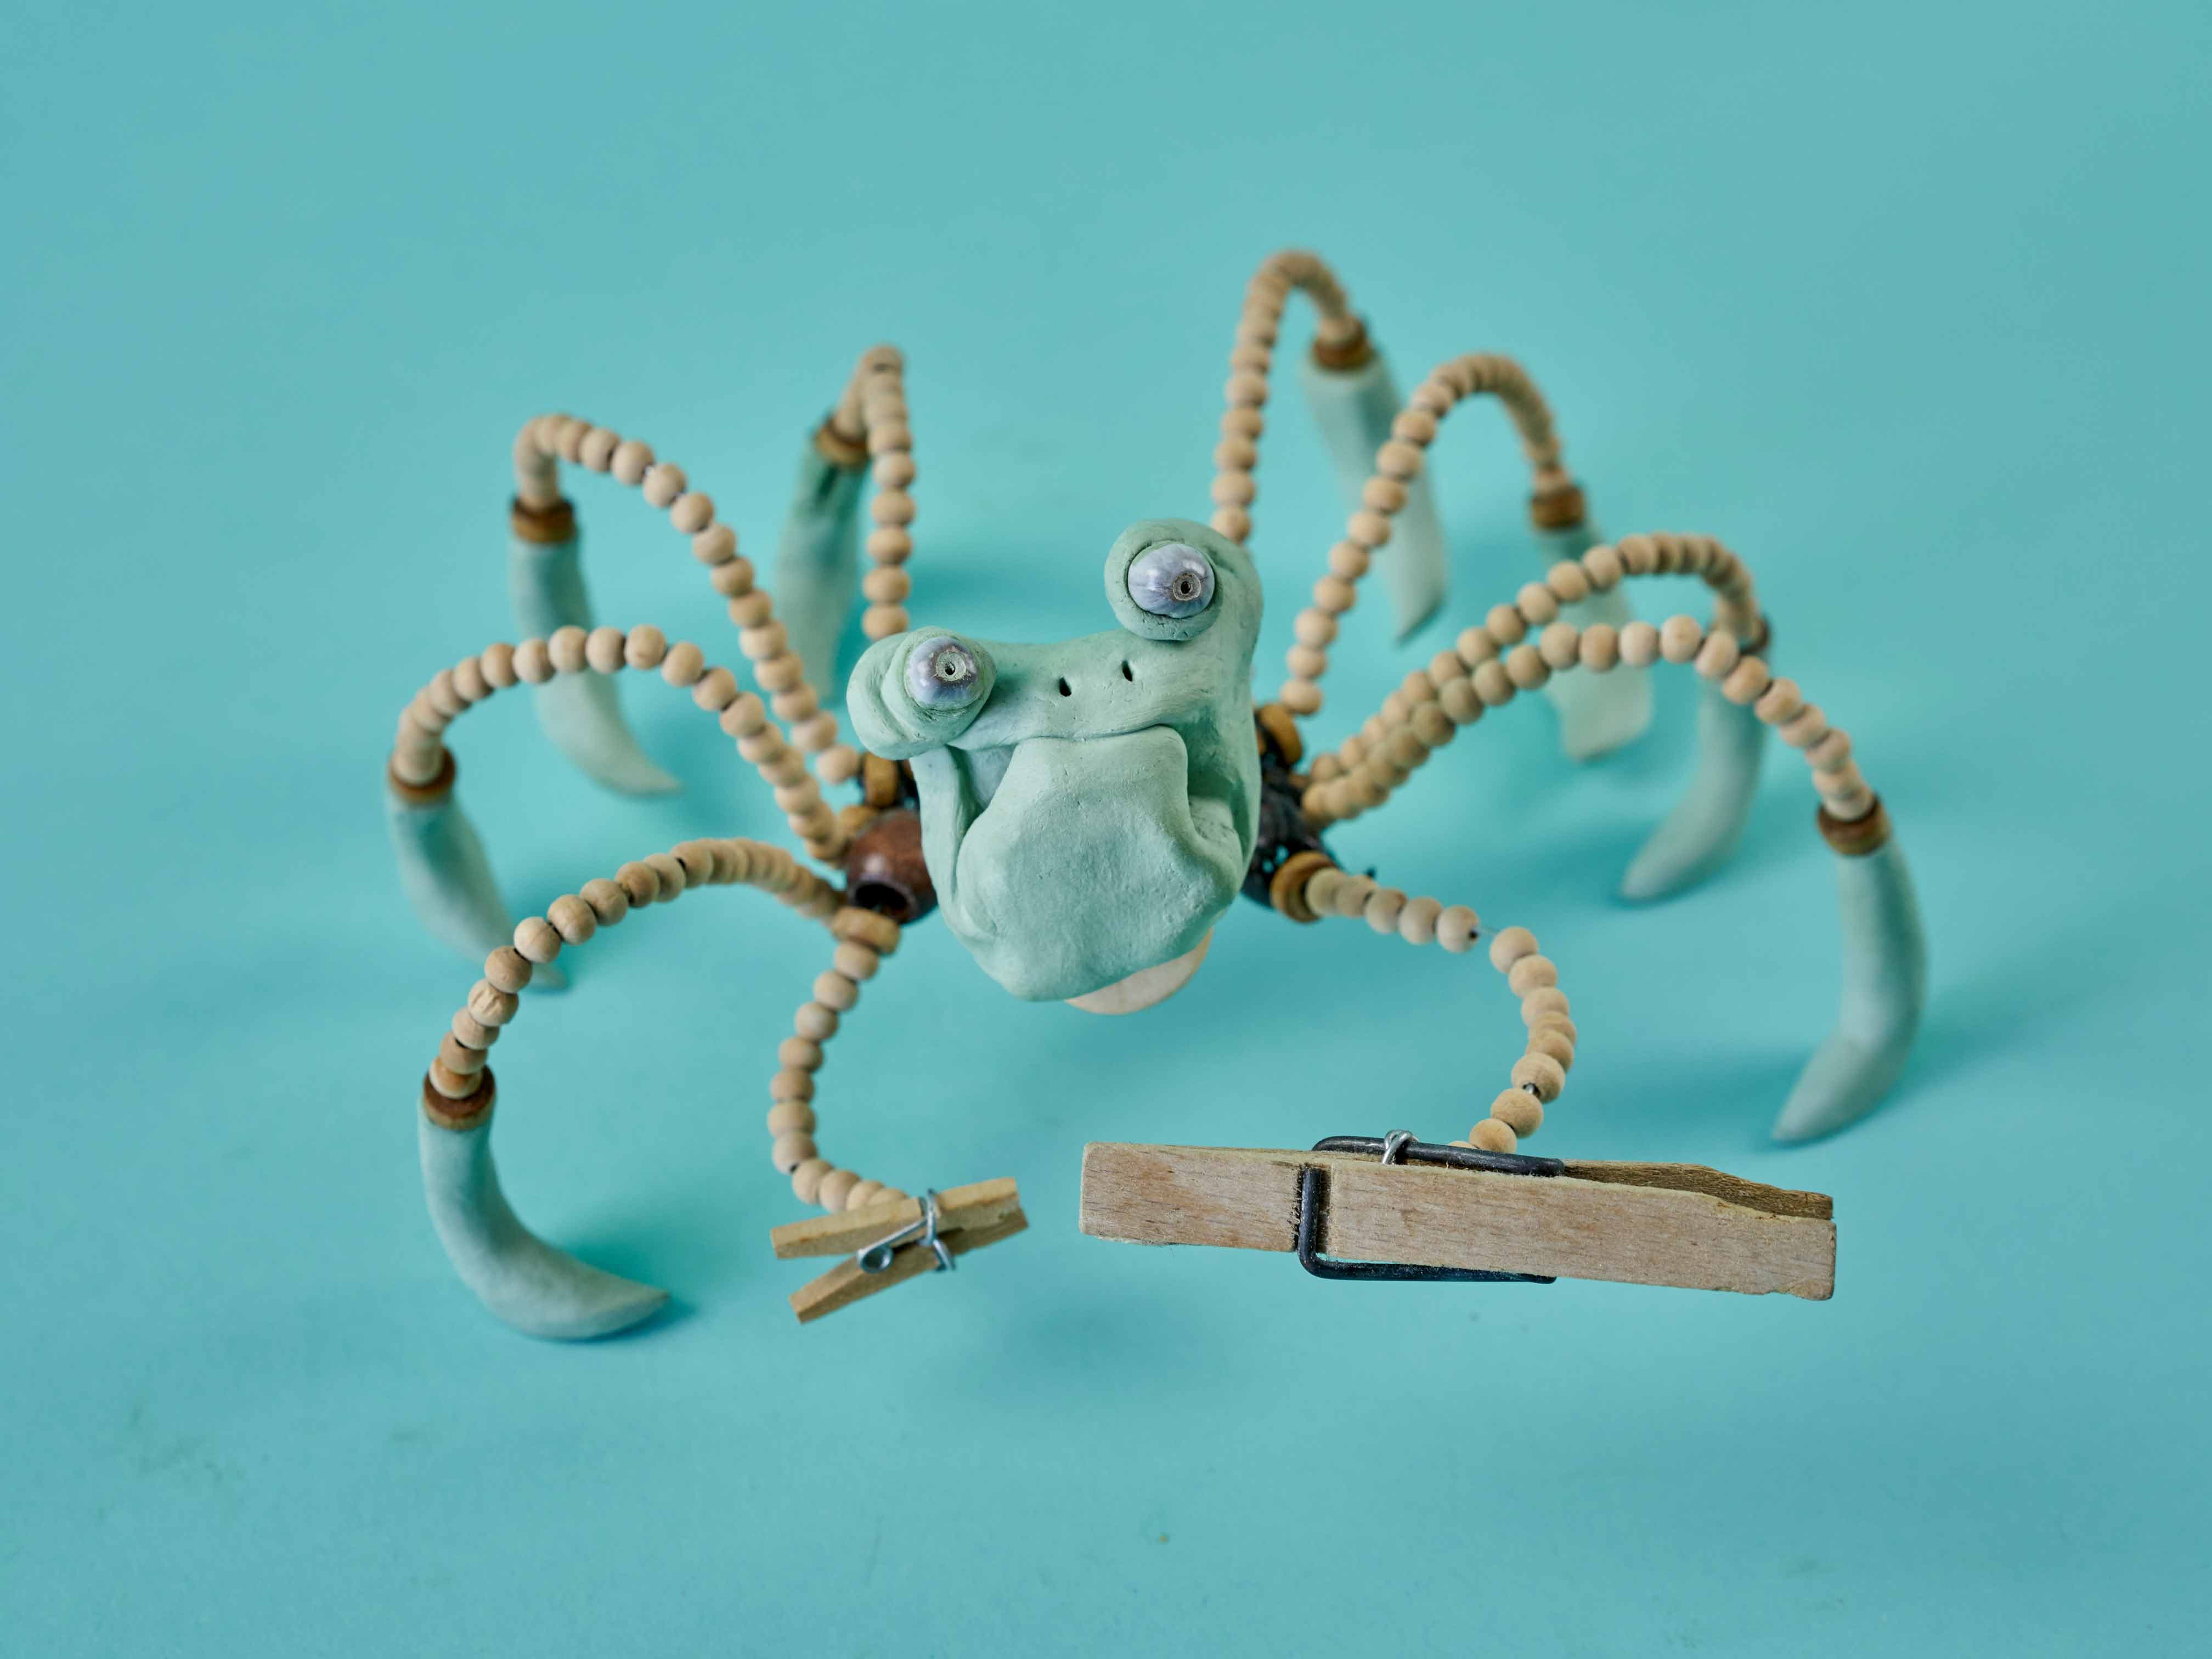 Grumpy Crab character made from green clay, wire, beads and clothespin claw